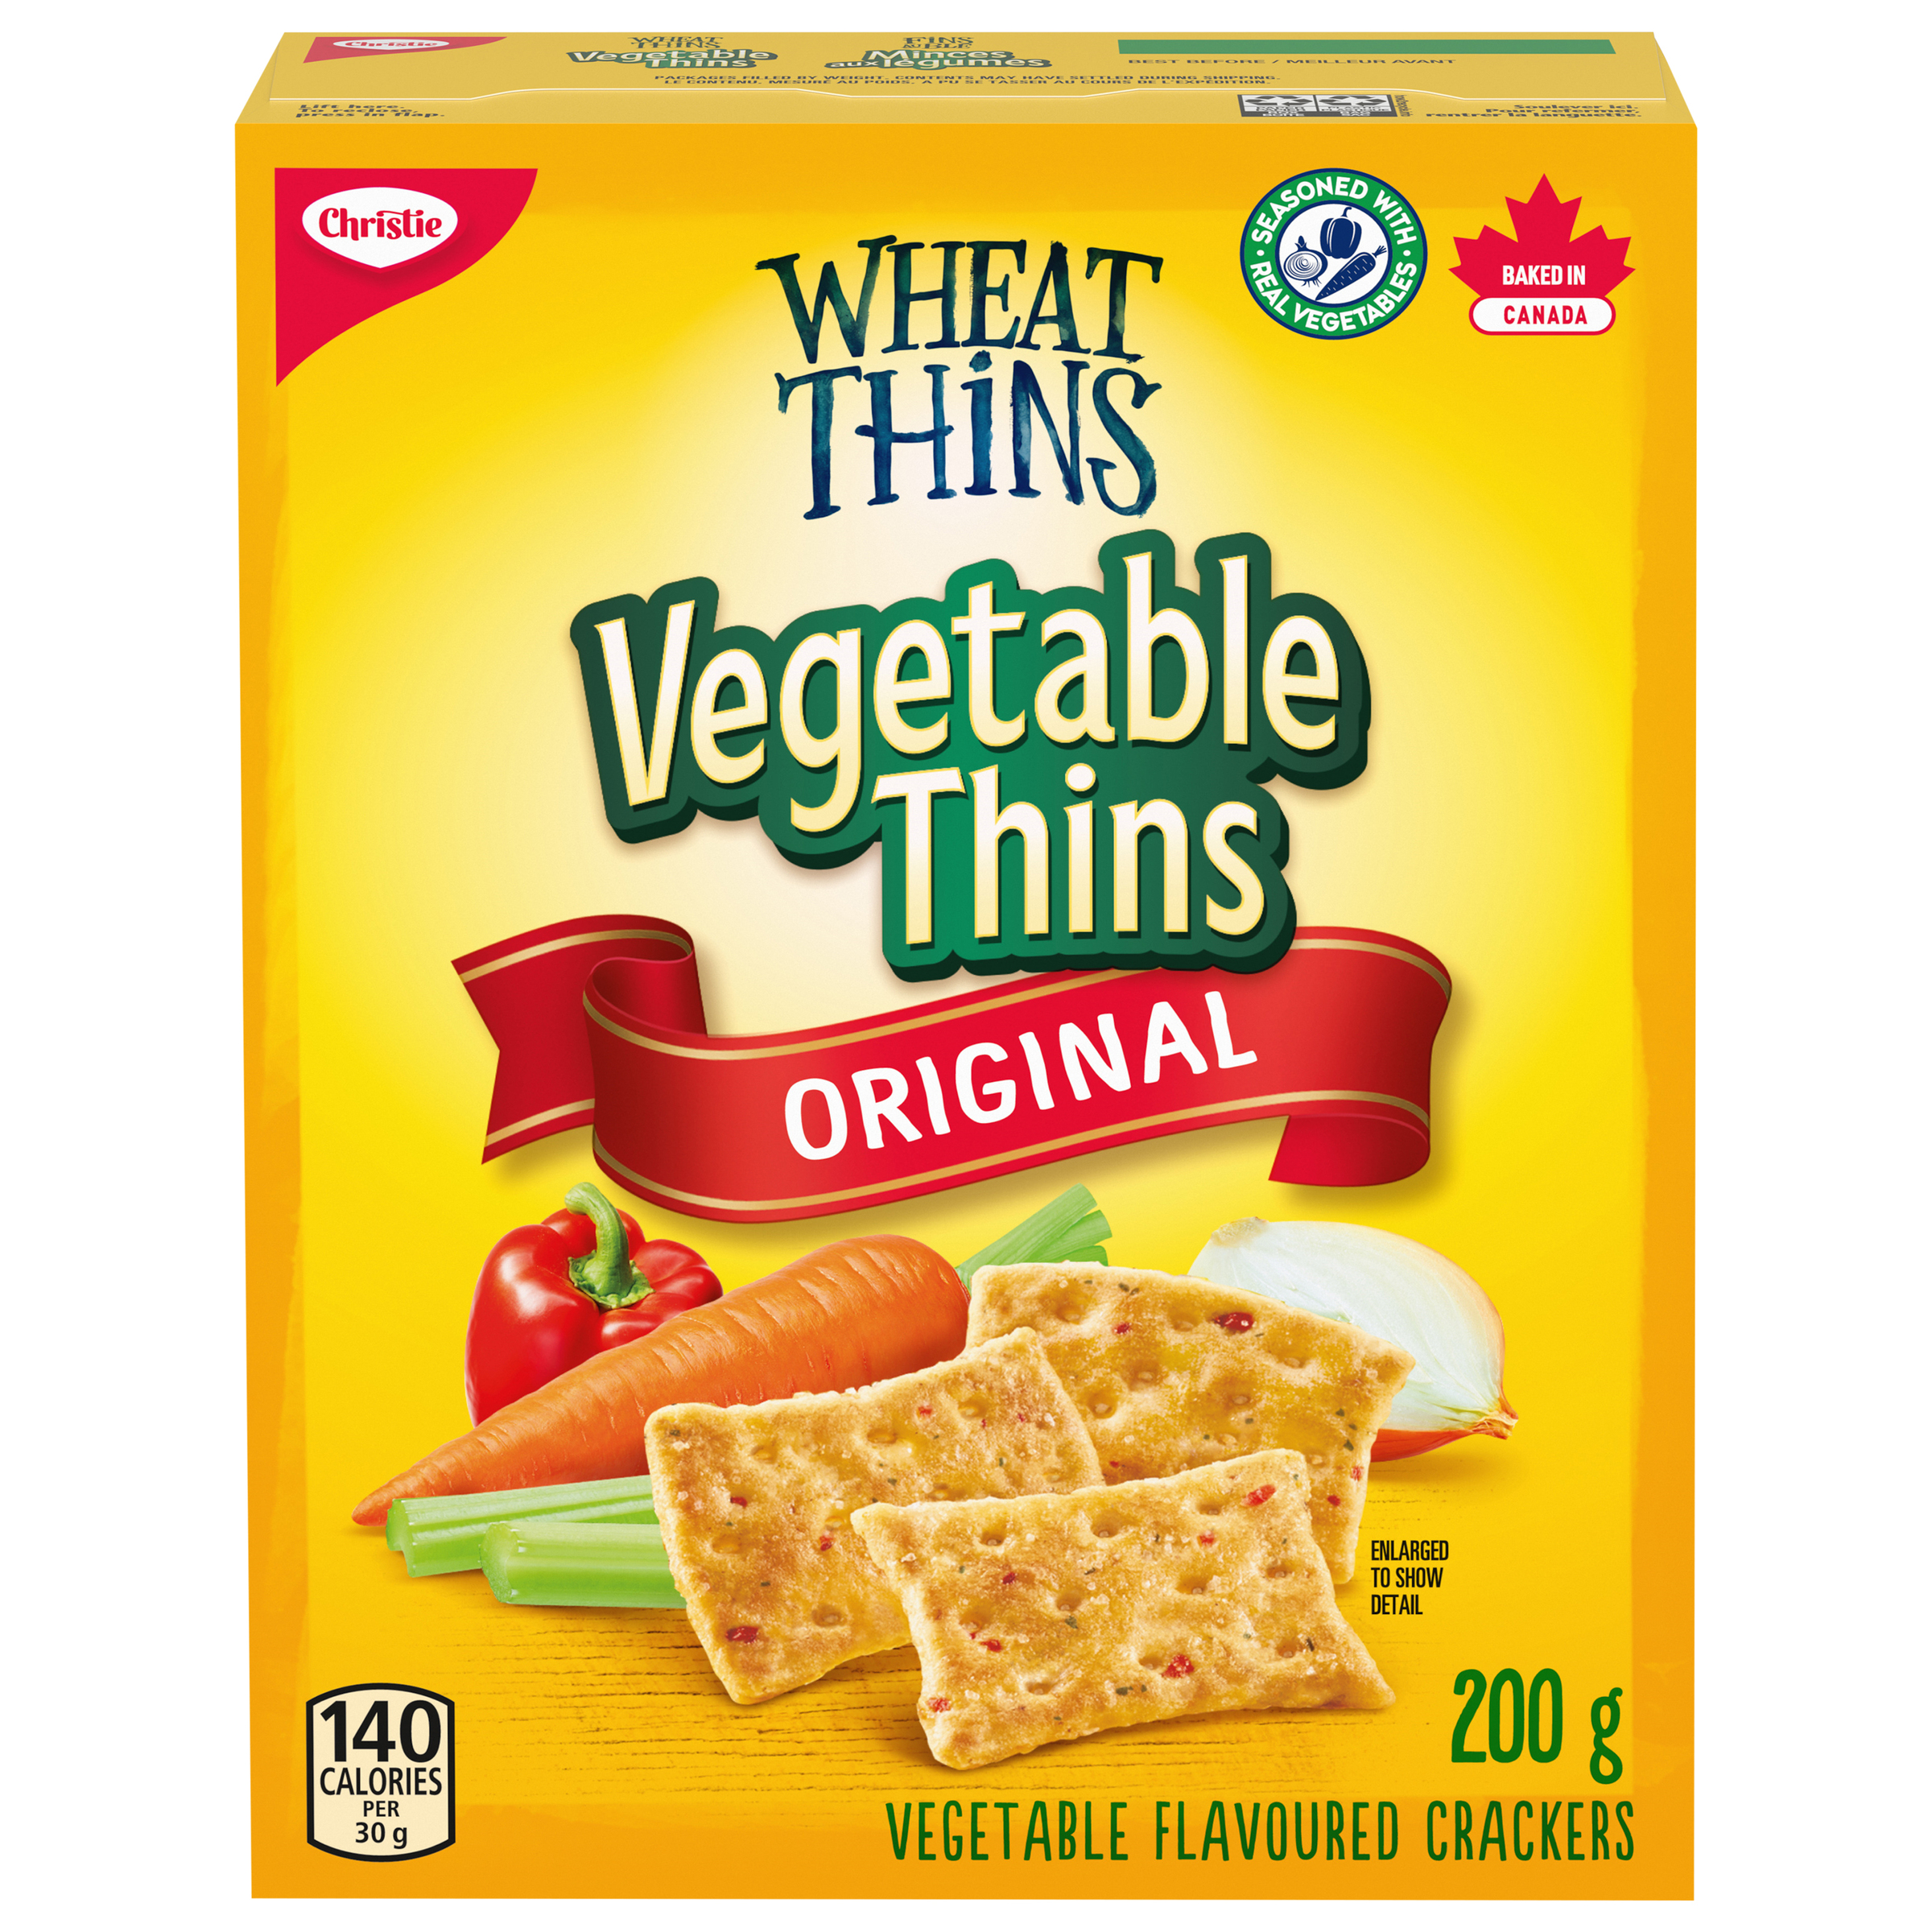 Wheat Thins Vegetable Thins Crackers 200 G